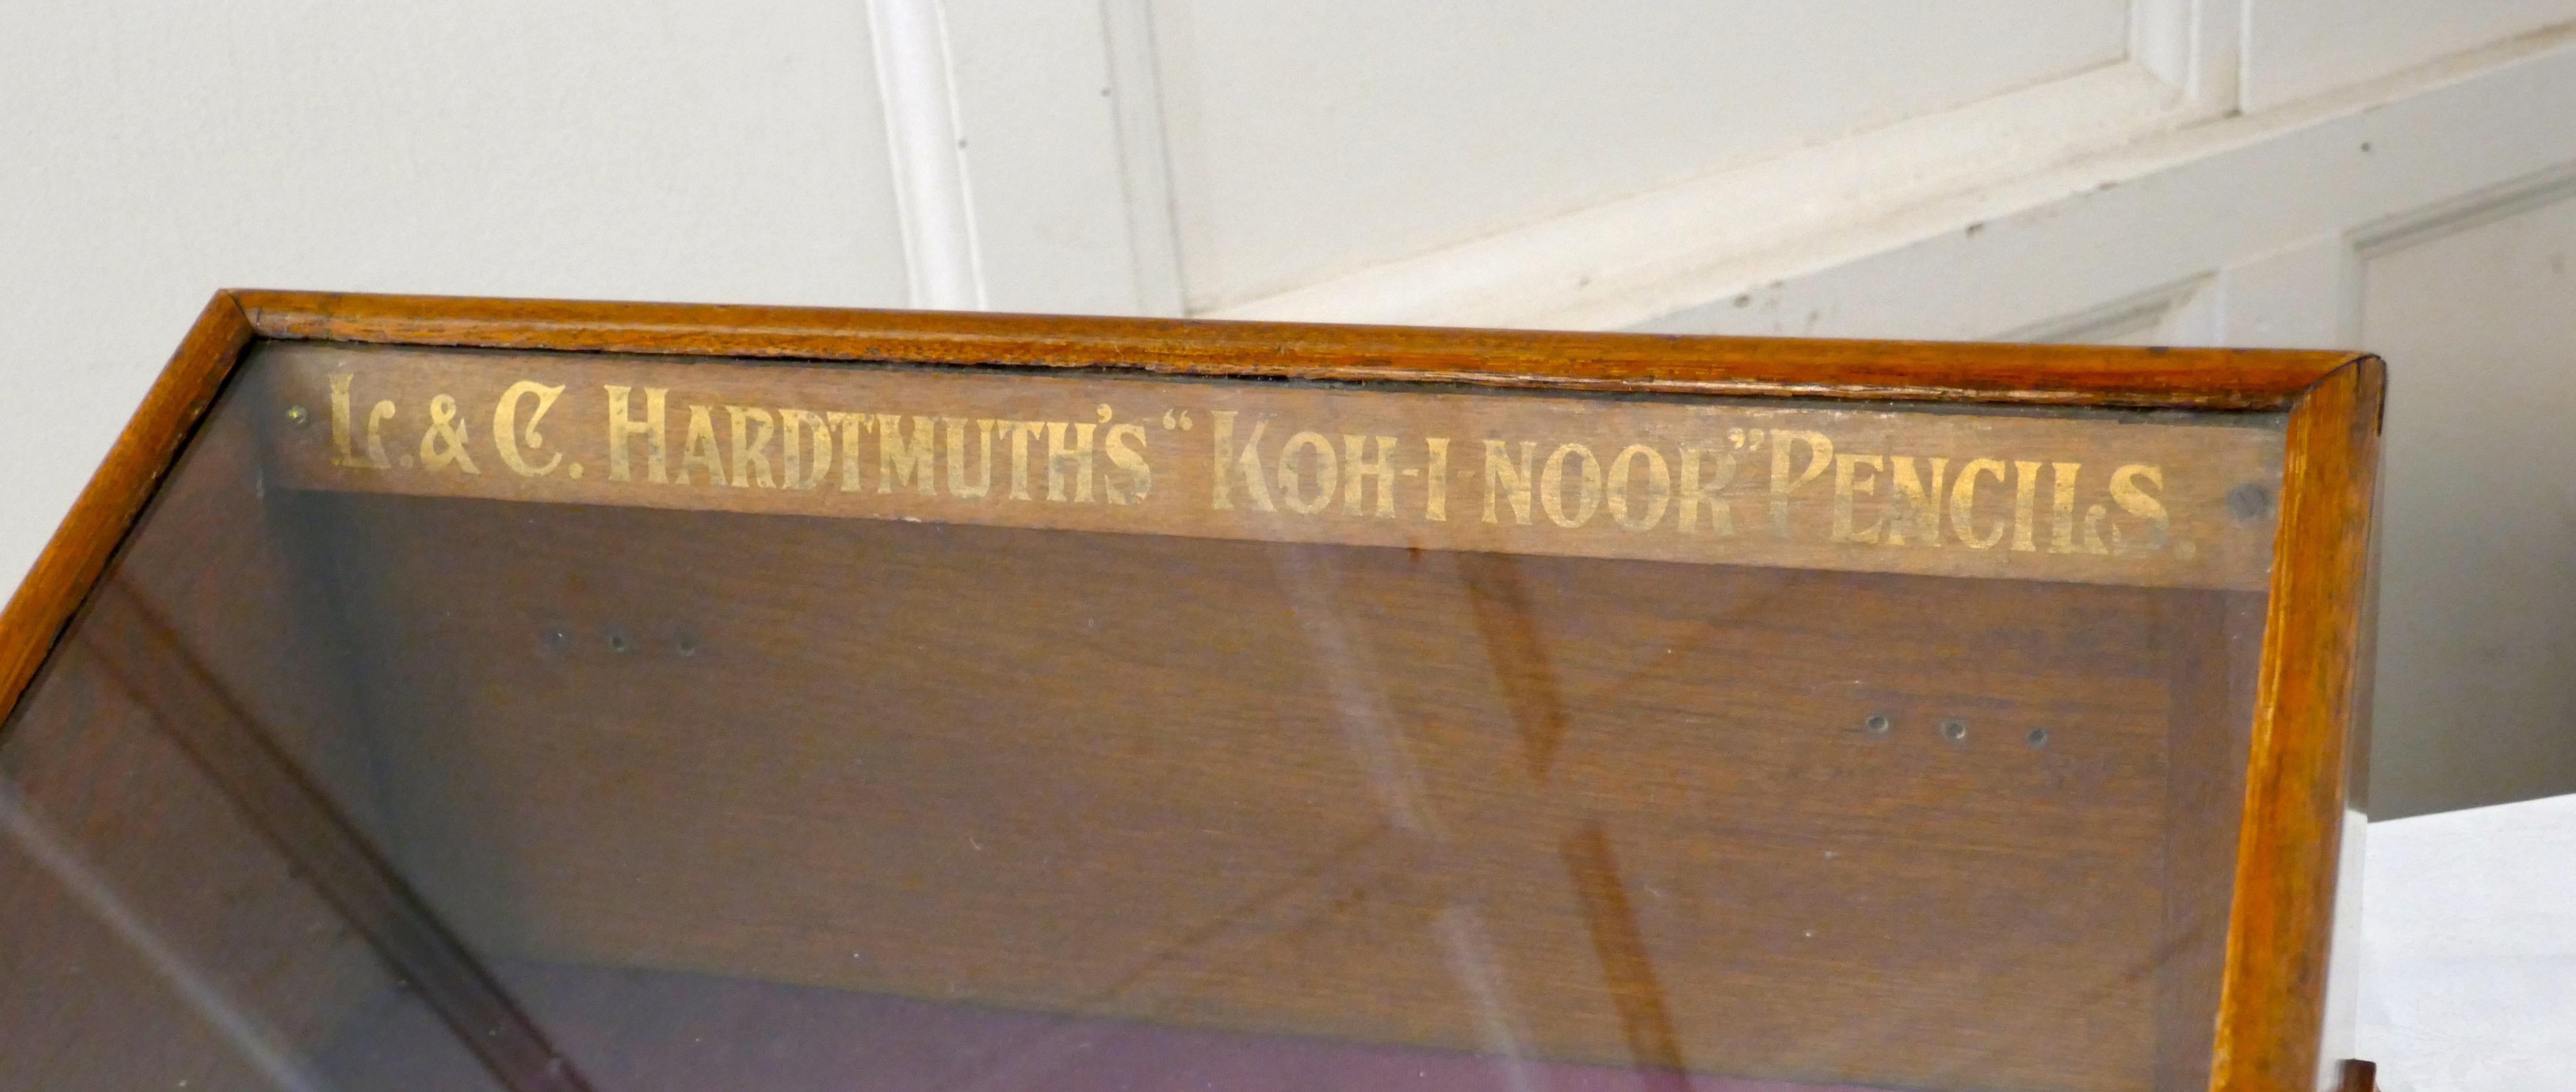 19th Century Counter top Display Cabinet for L & C HARDMUTH’S “KOH-I NOOR” Pencils